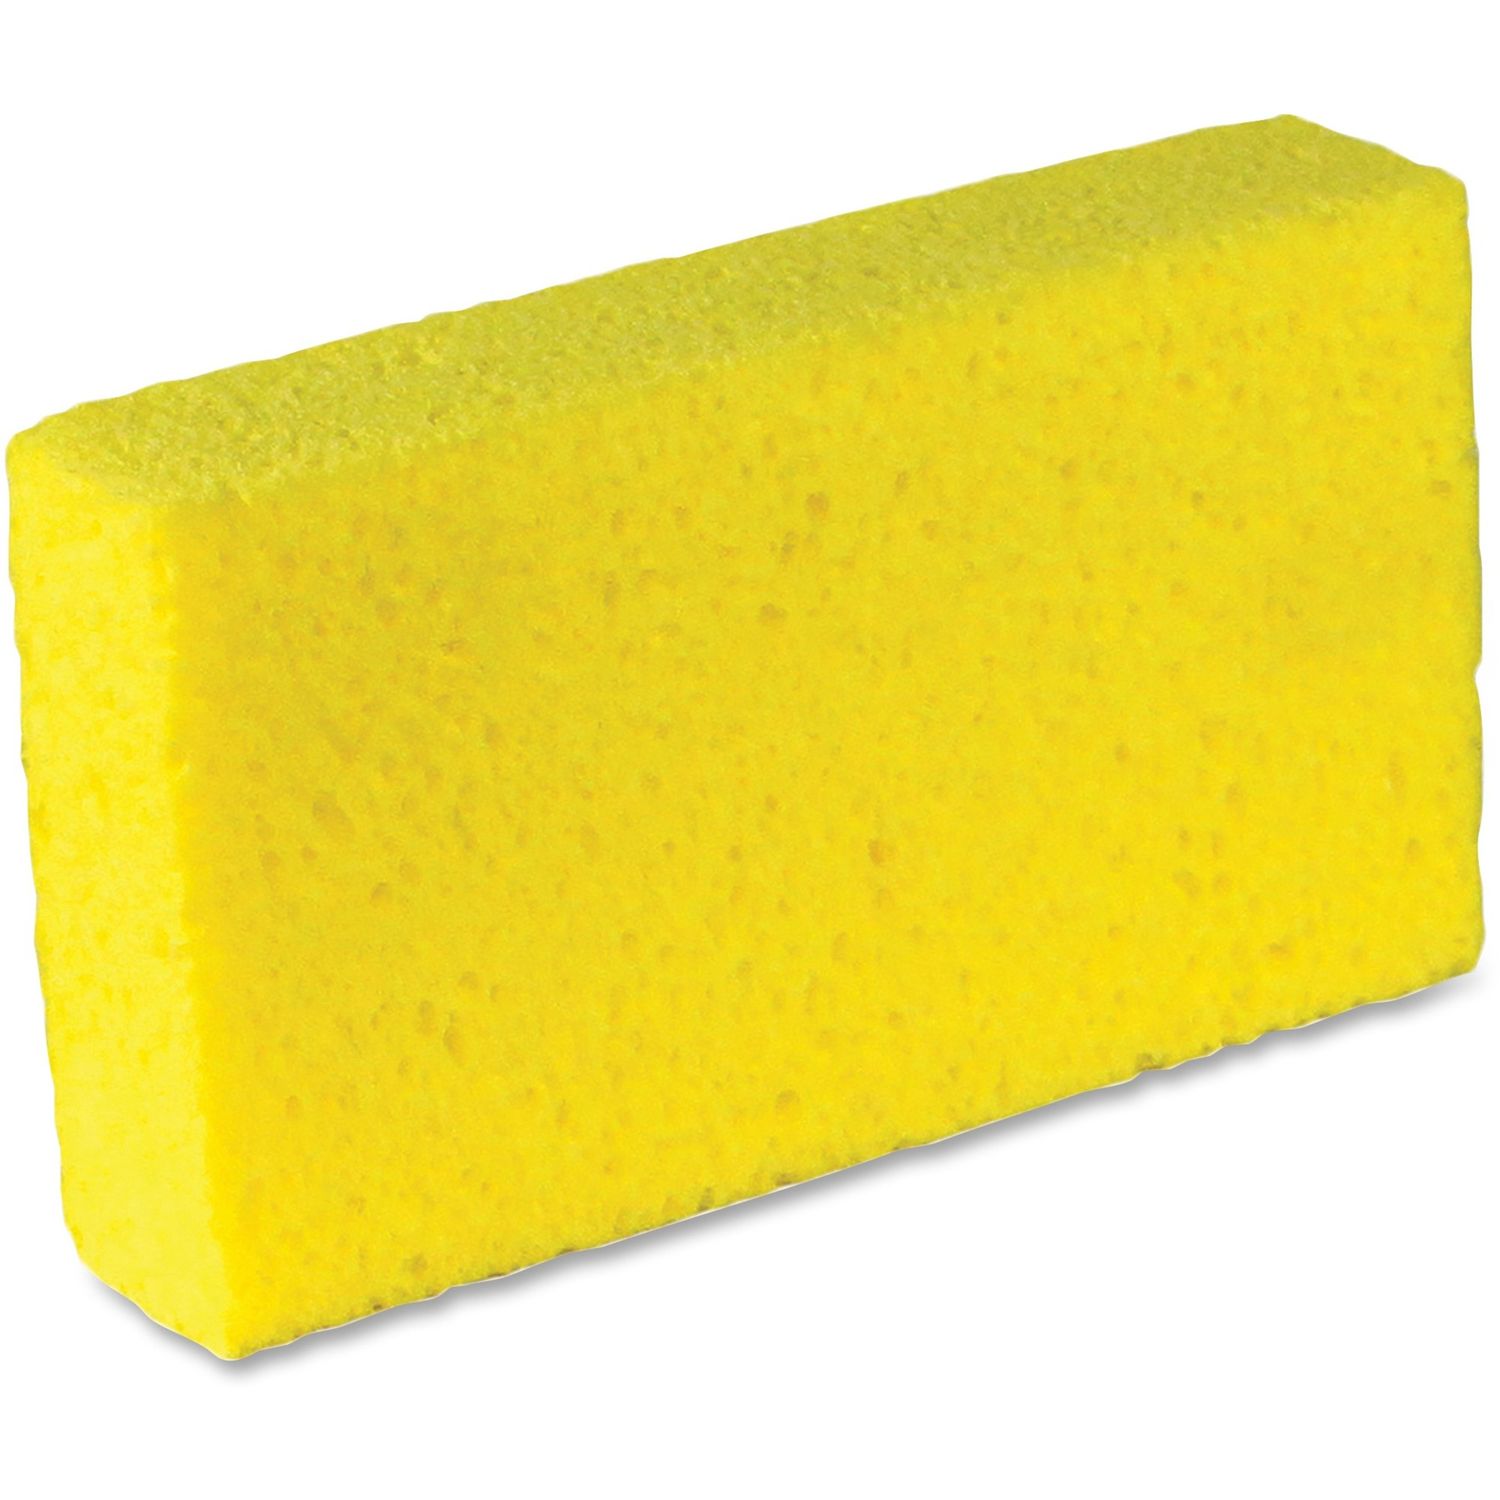 Large Cellulose Sponges 1.7" Height x 4.2" Width x 7.5" Length, 24/Carton, Cellulose, Yellow